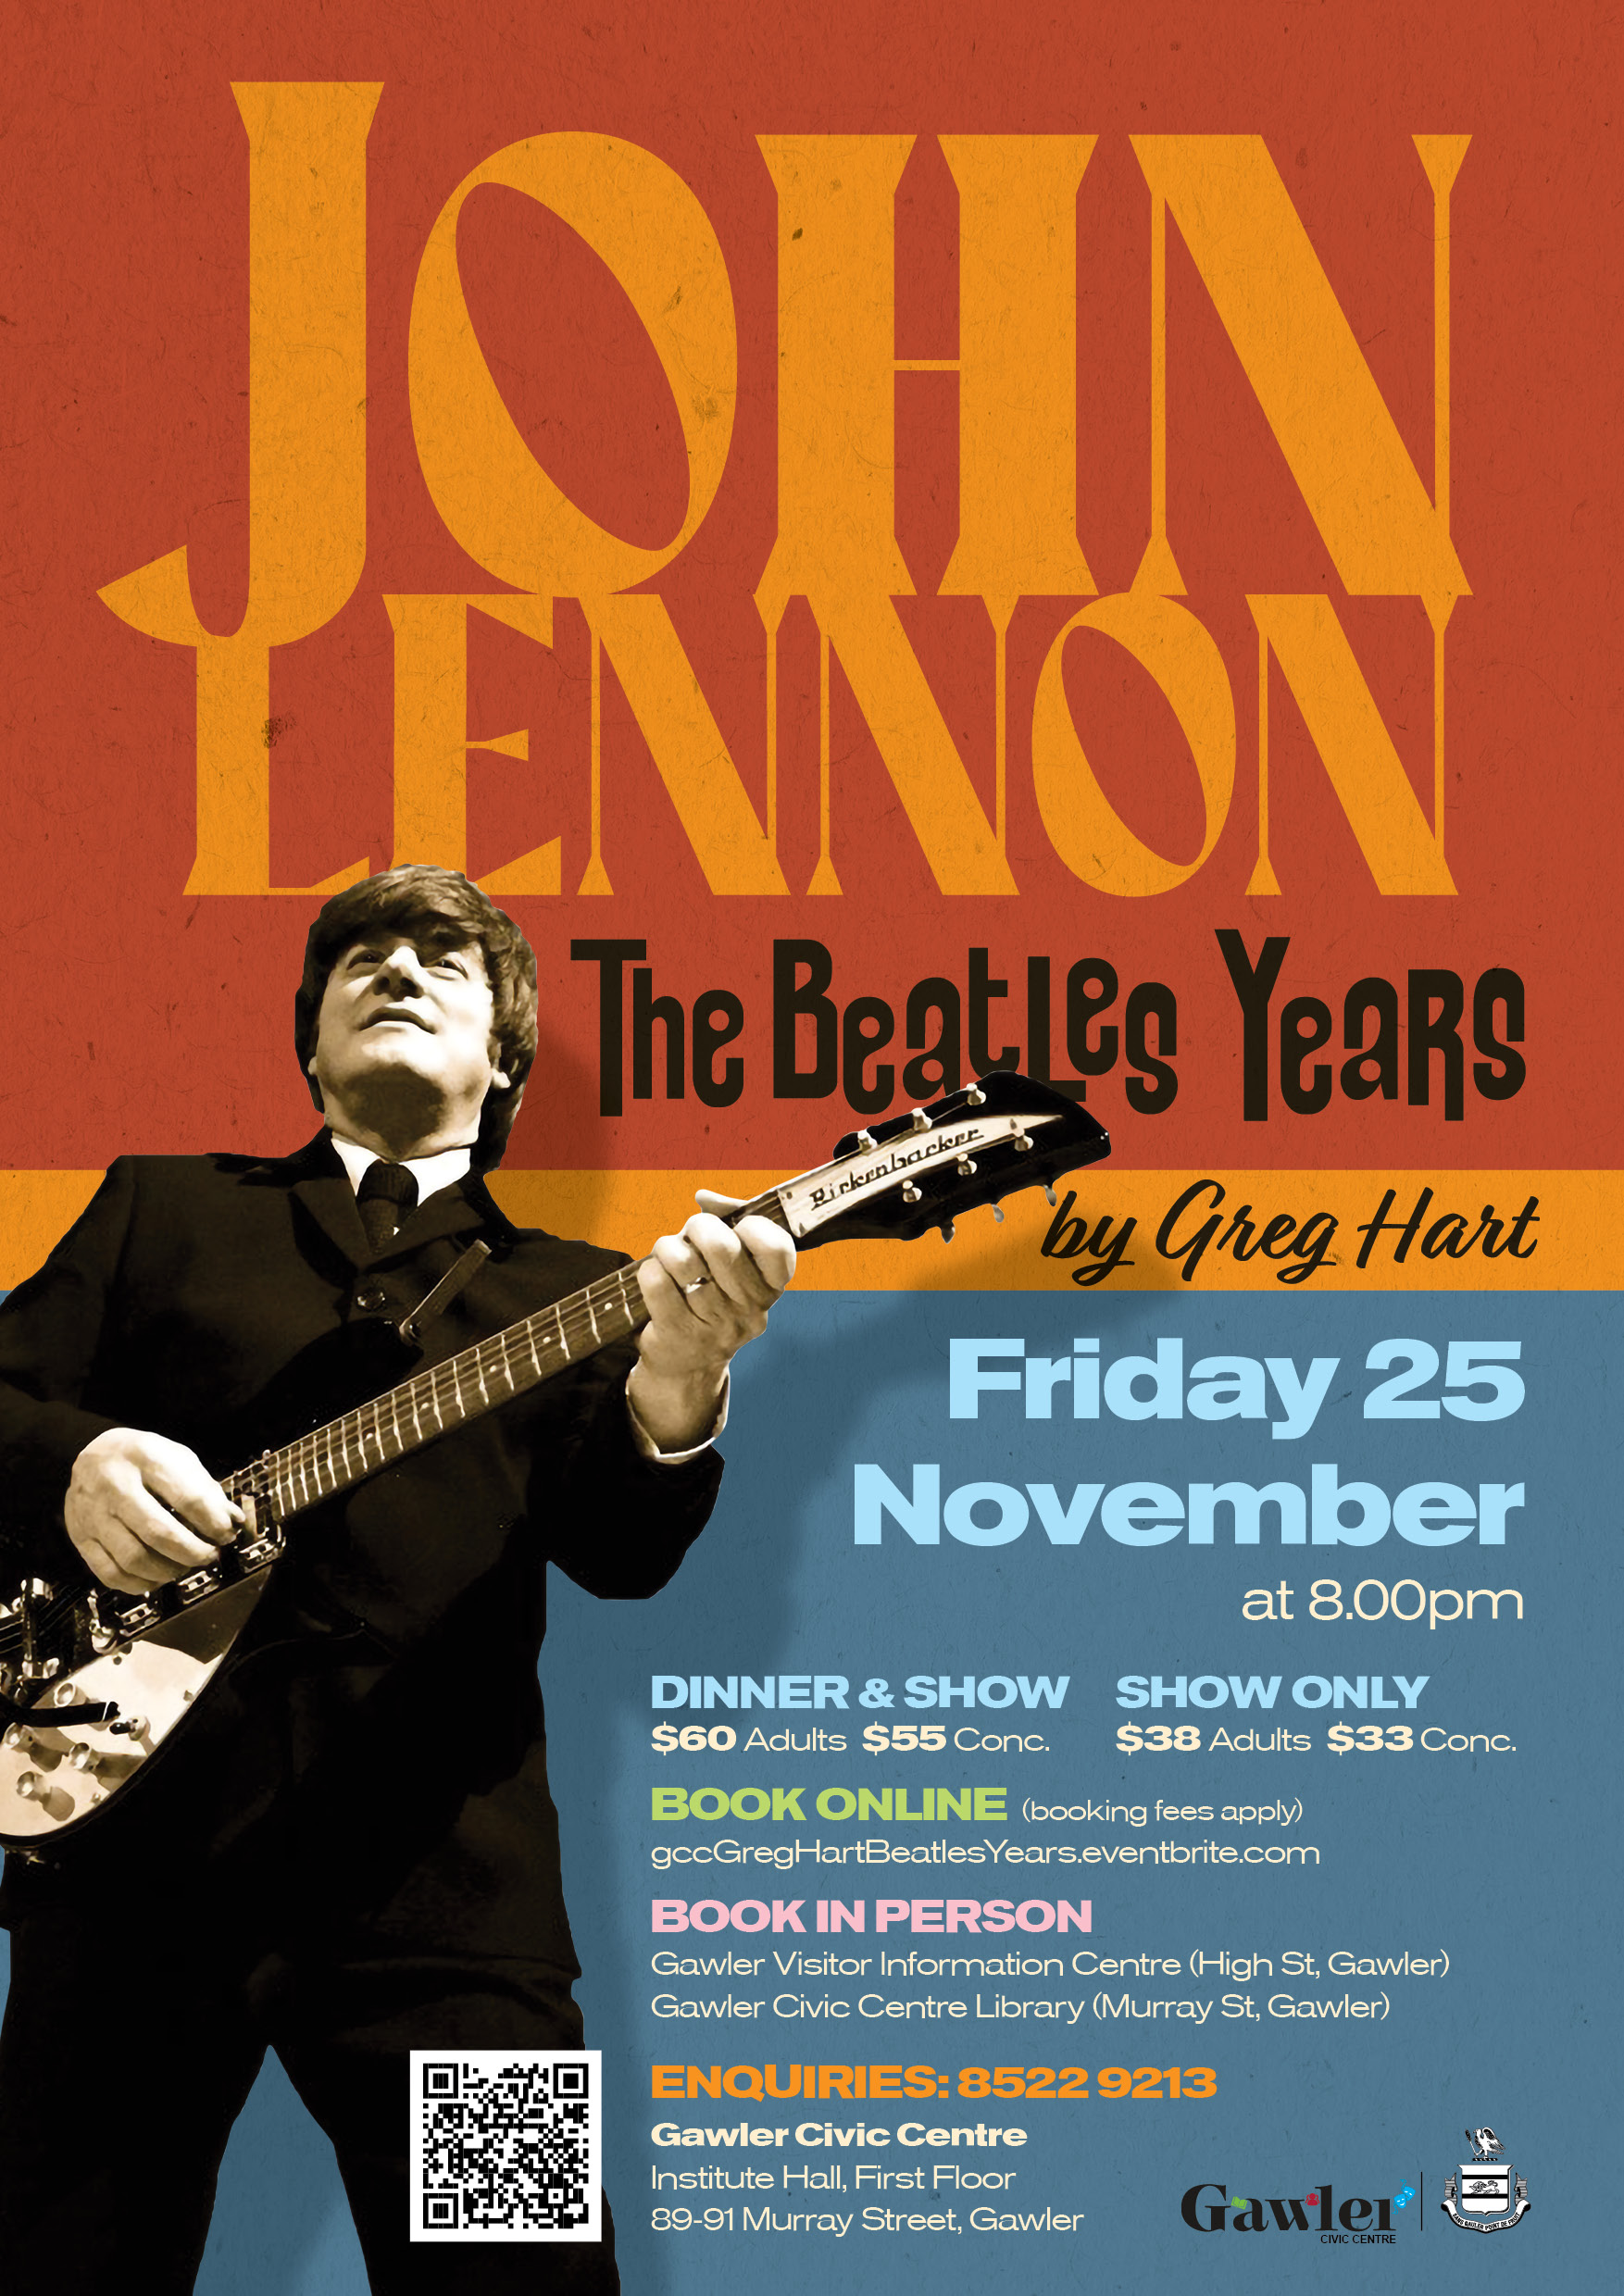 JOHN LENNON – THE BEATLES YEARS AT THE GAWLER CIVIC CENTRE